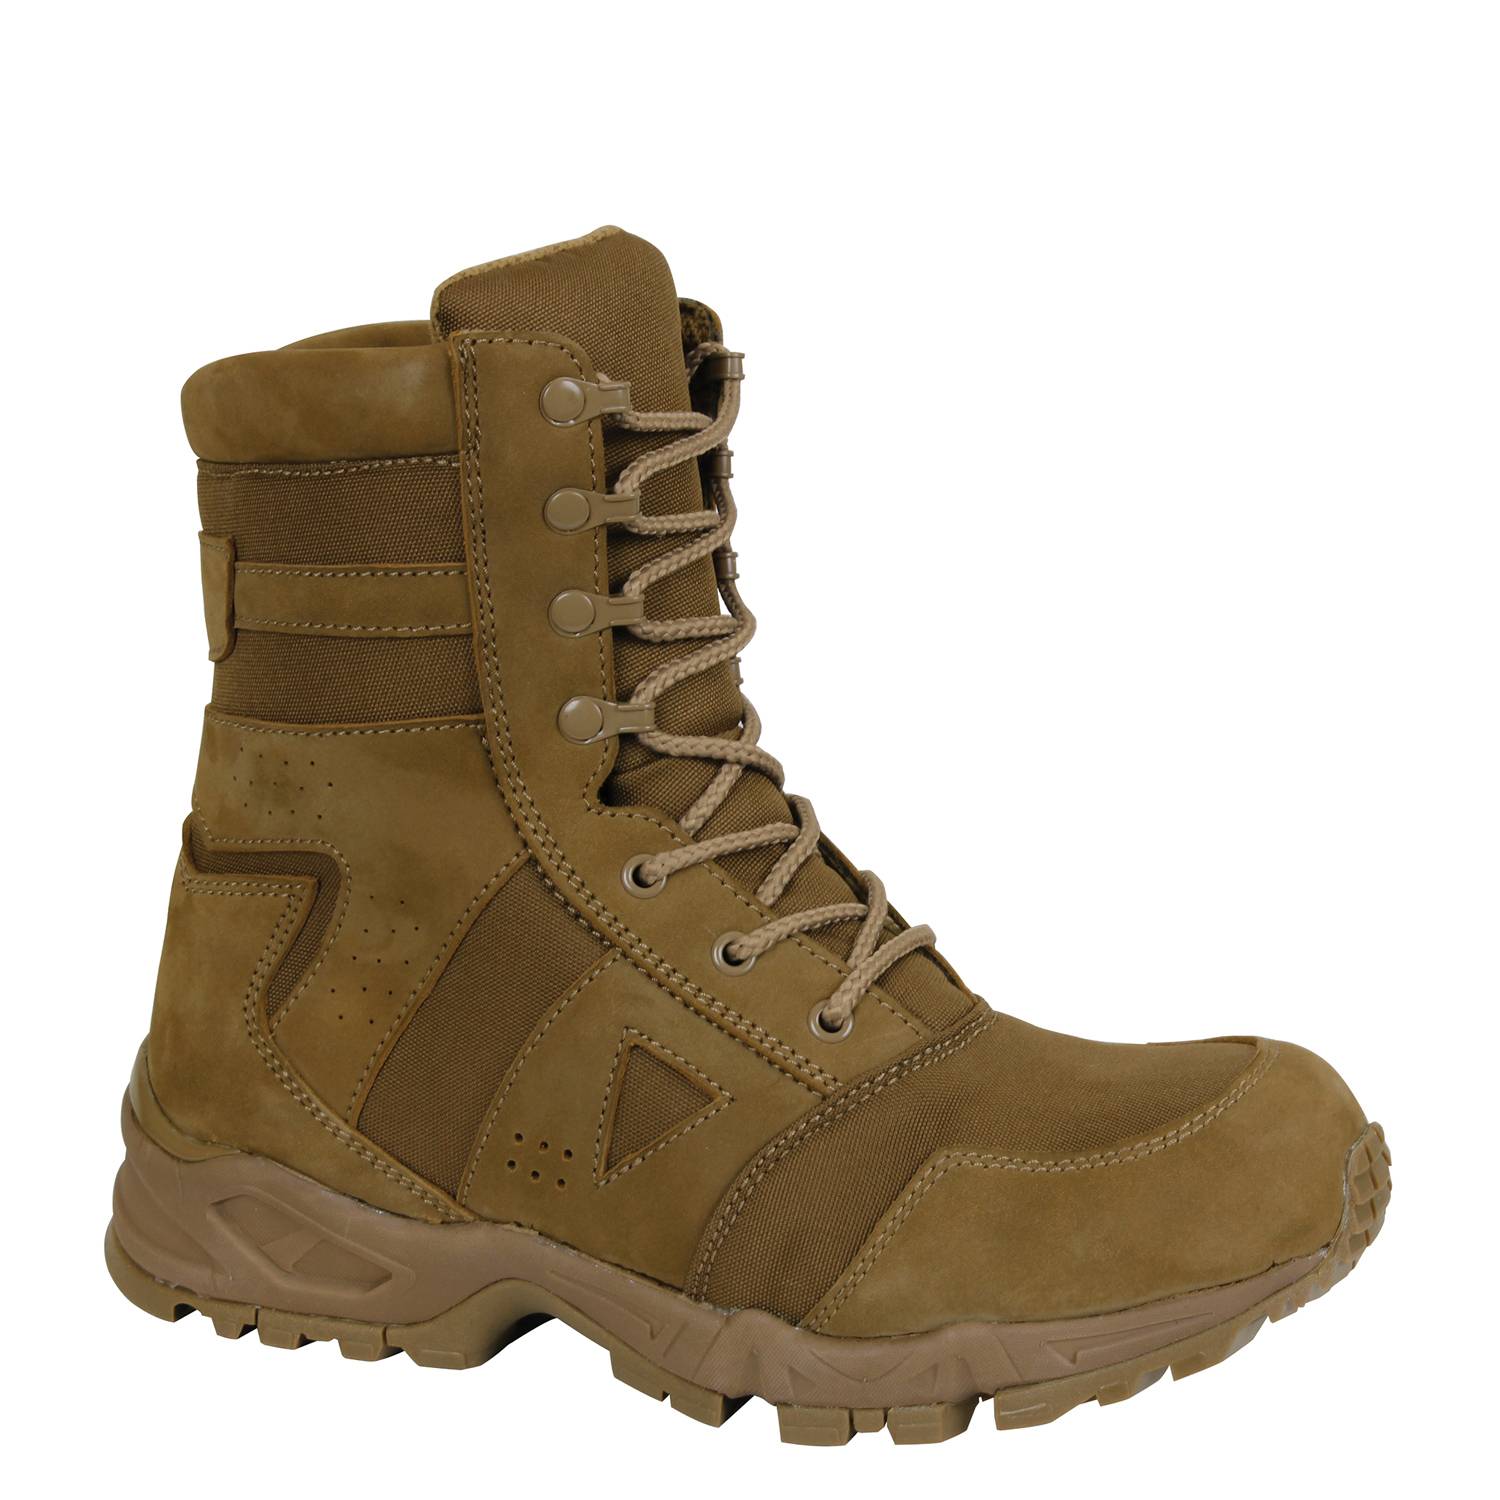 Coyote Brown Tactical Boots Rothco